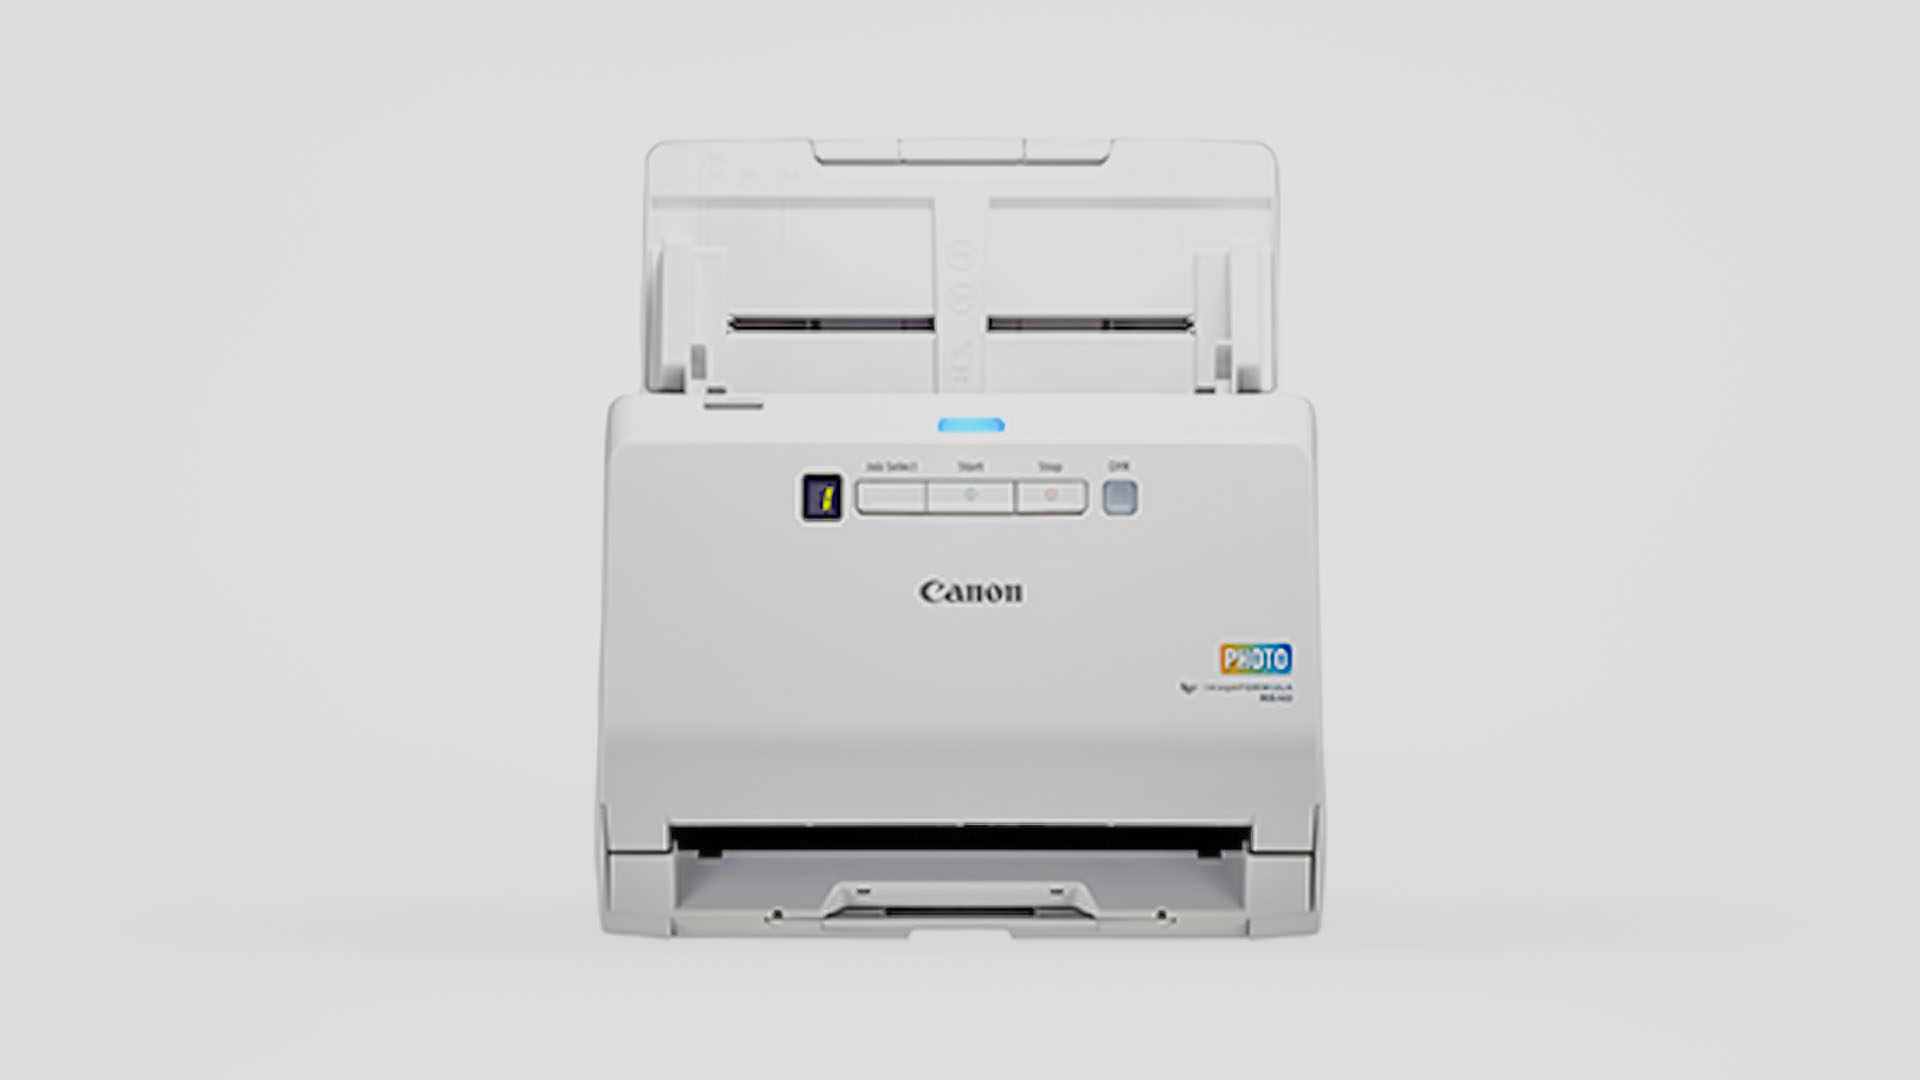 Canon strengthens its Portfolio with the Imageformula RS40 photo scanner, Increasing growth opportunities in new imaging markets 